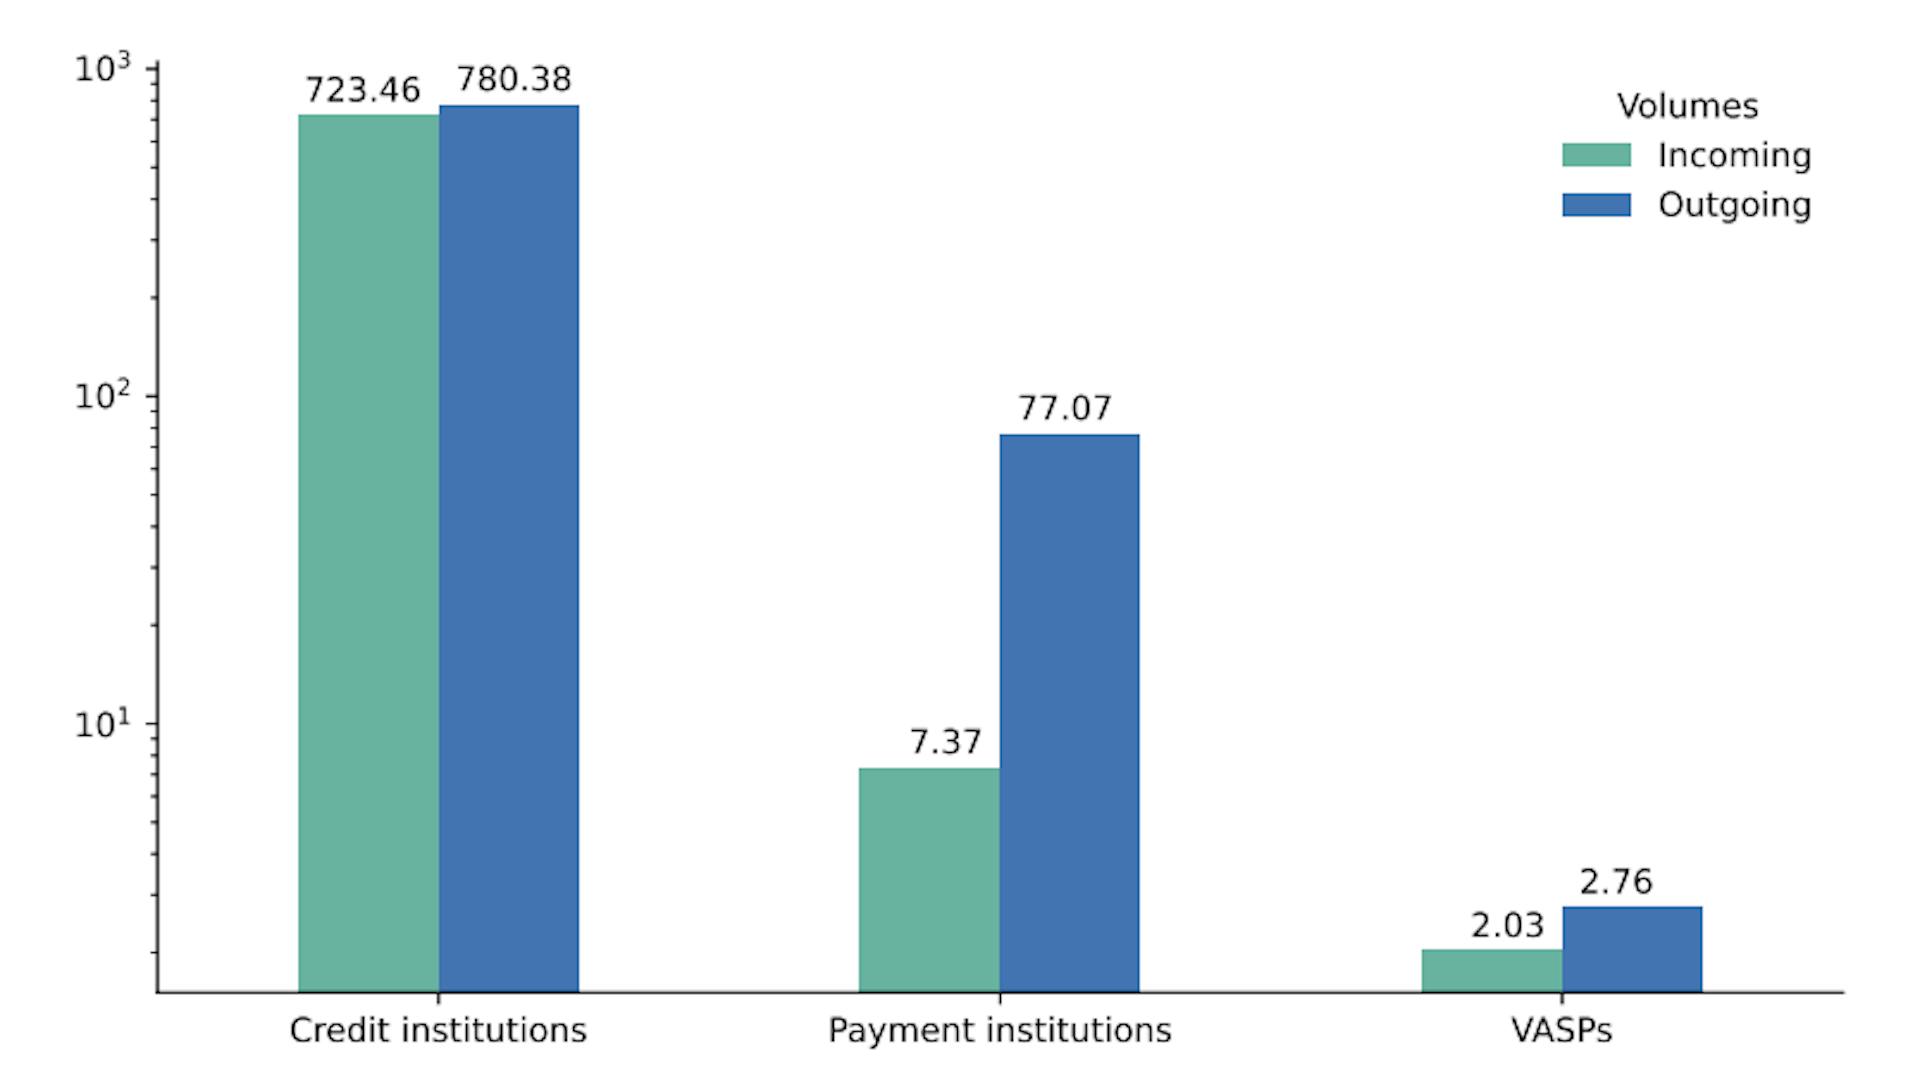 Figure 5: Transaction volumes of Austrian VASPs and other financial intermediaries. The incoming and outgoing transaction volumes of VASPs are respectively one order and two orders of magnitude smaller than those of payment institutions and credit institutions.